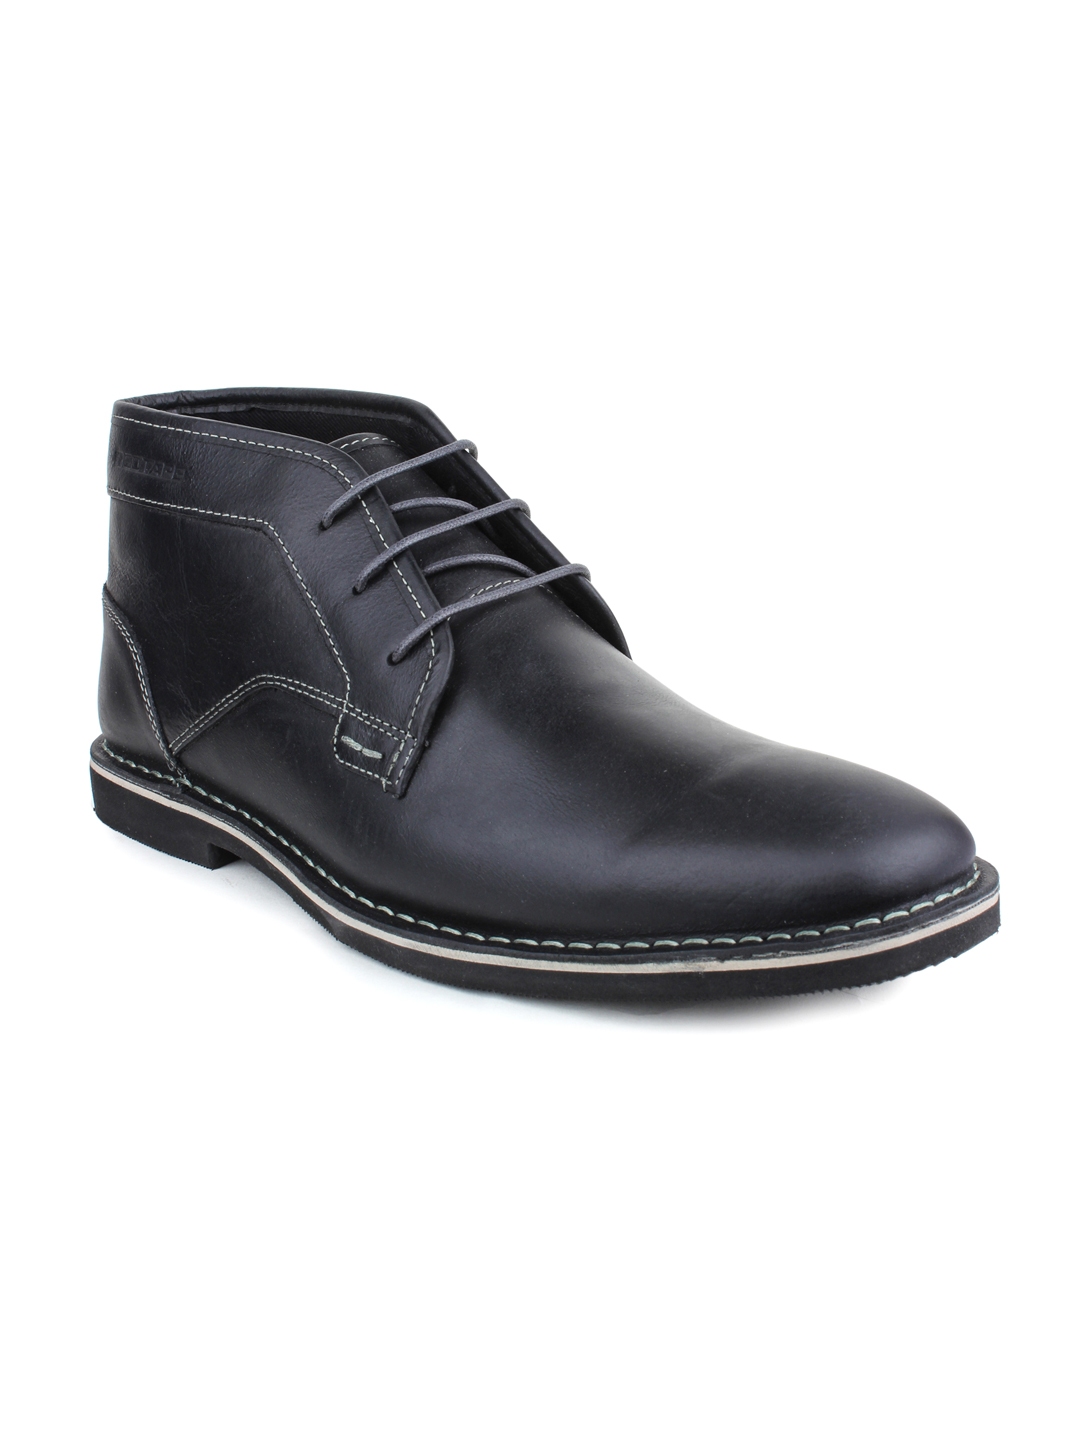 Buy Red Tape Men Black Leather Chukka Boots - Boots for Men 1409634 ...